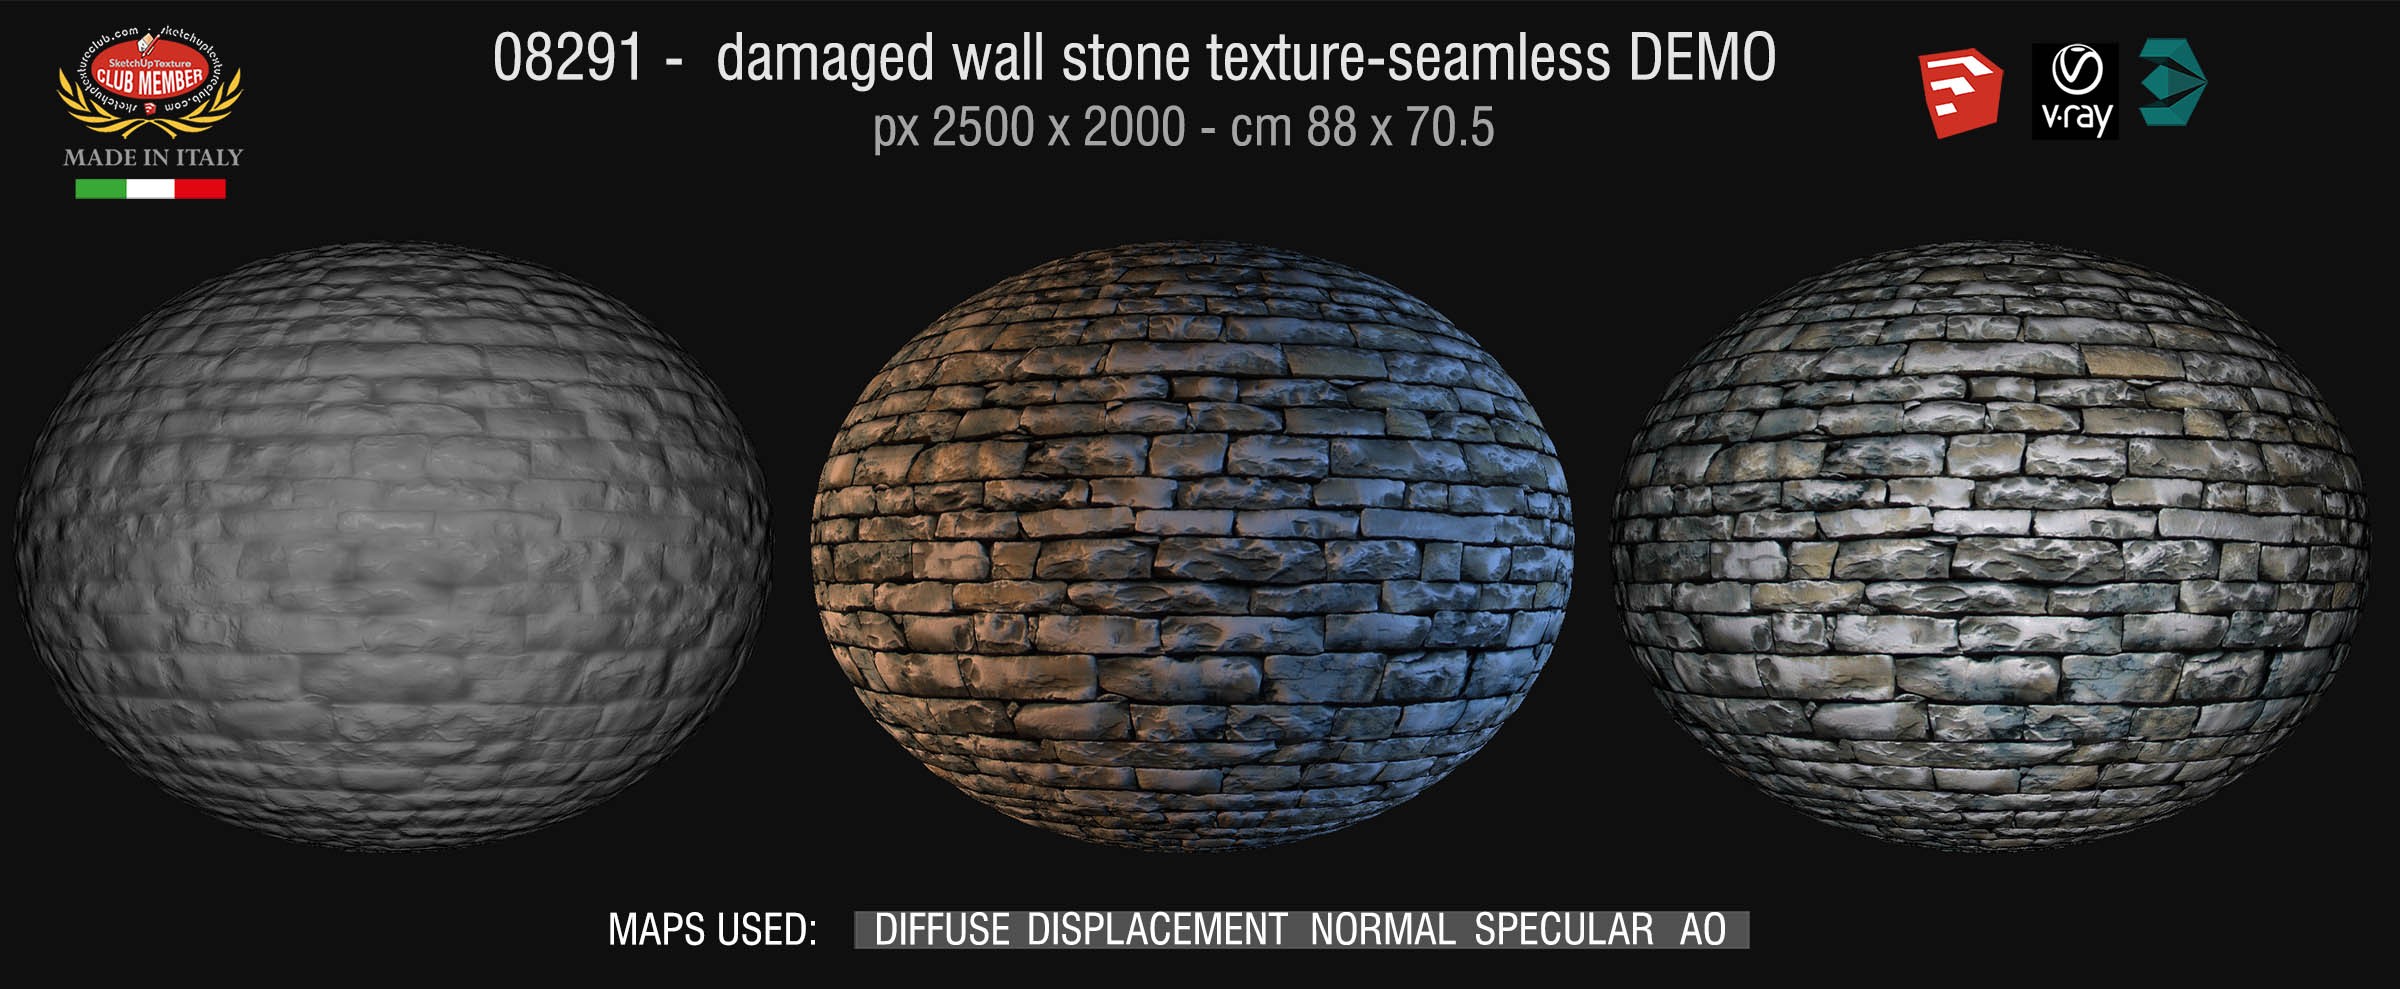 08291 HR Damaged wall stone texture + maps DEMO